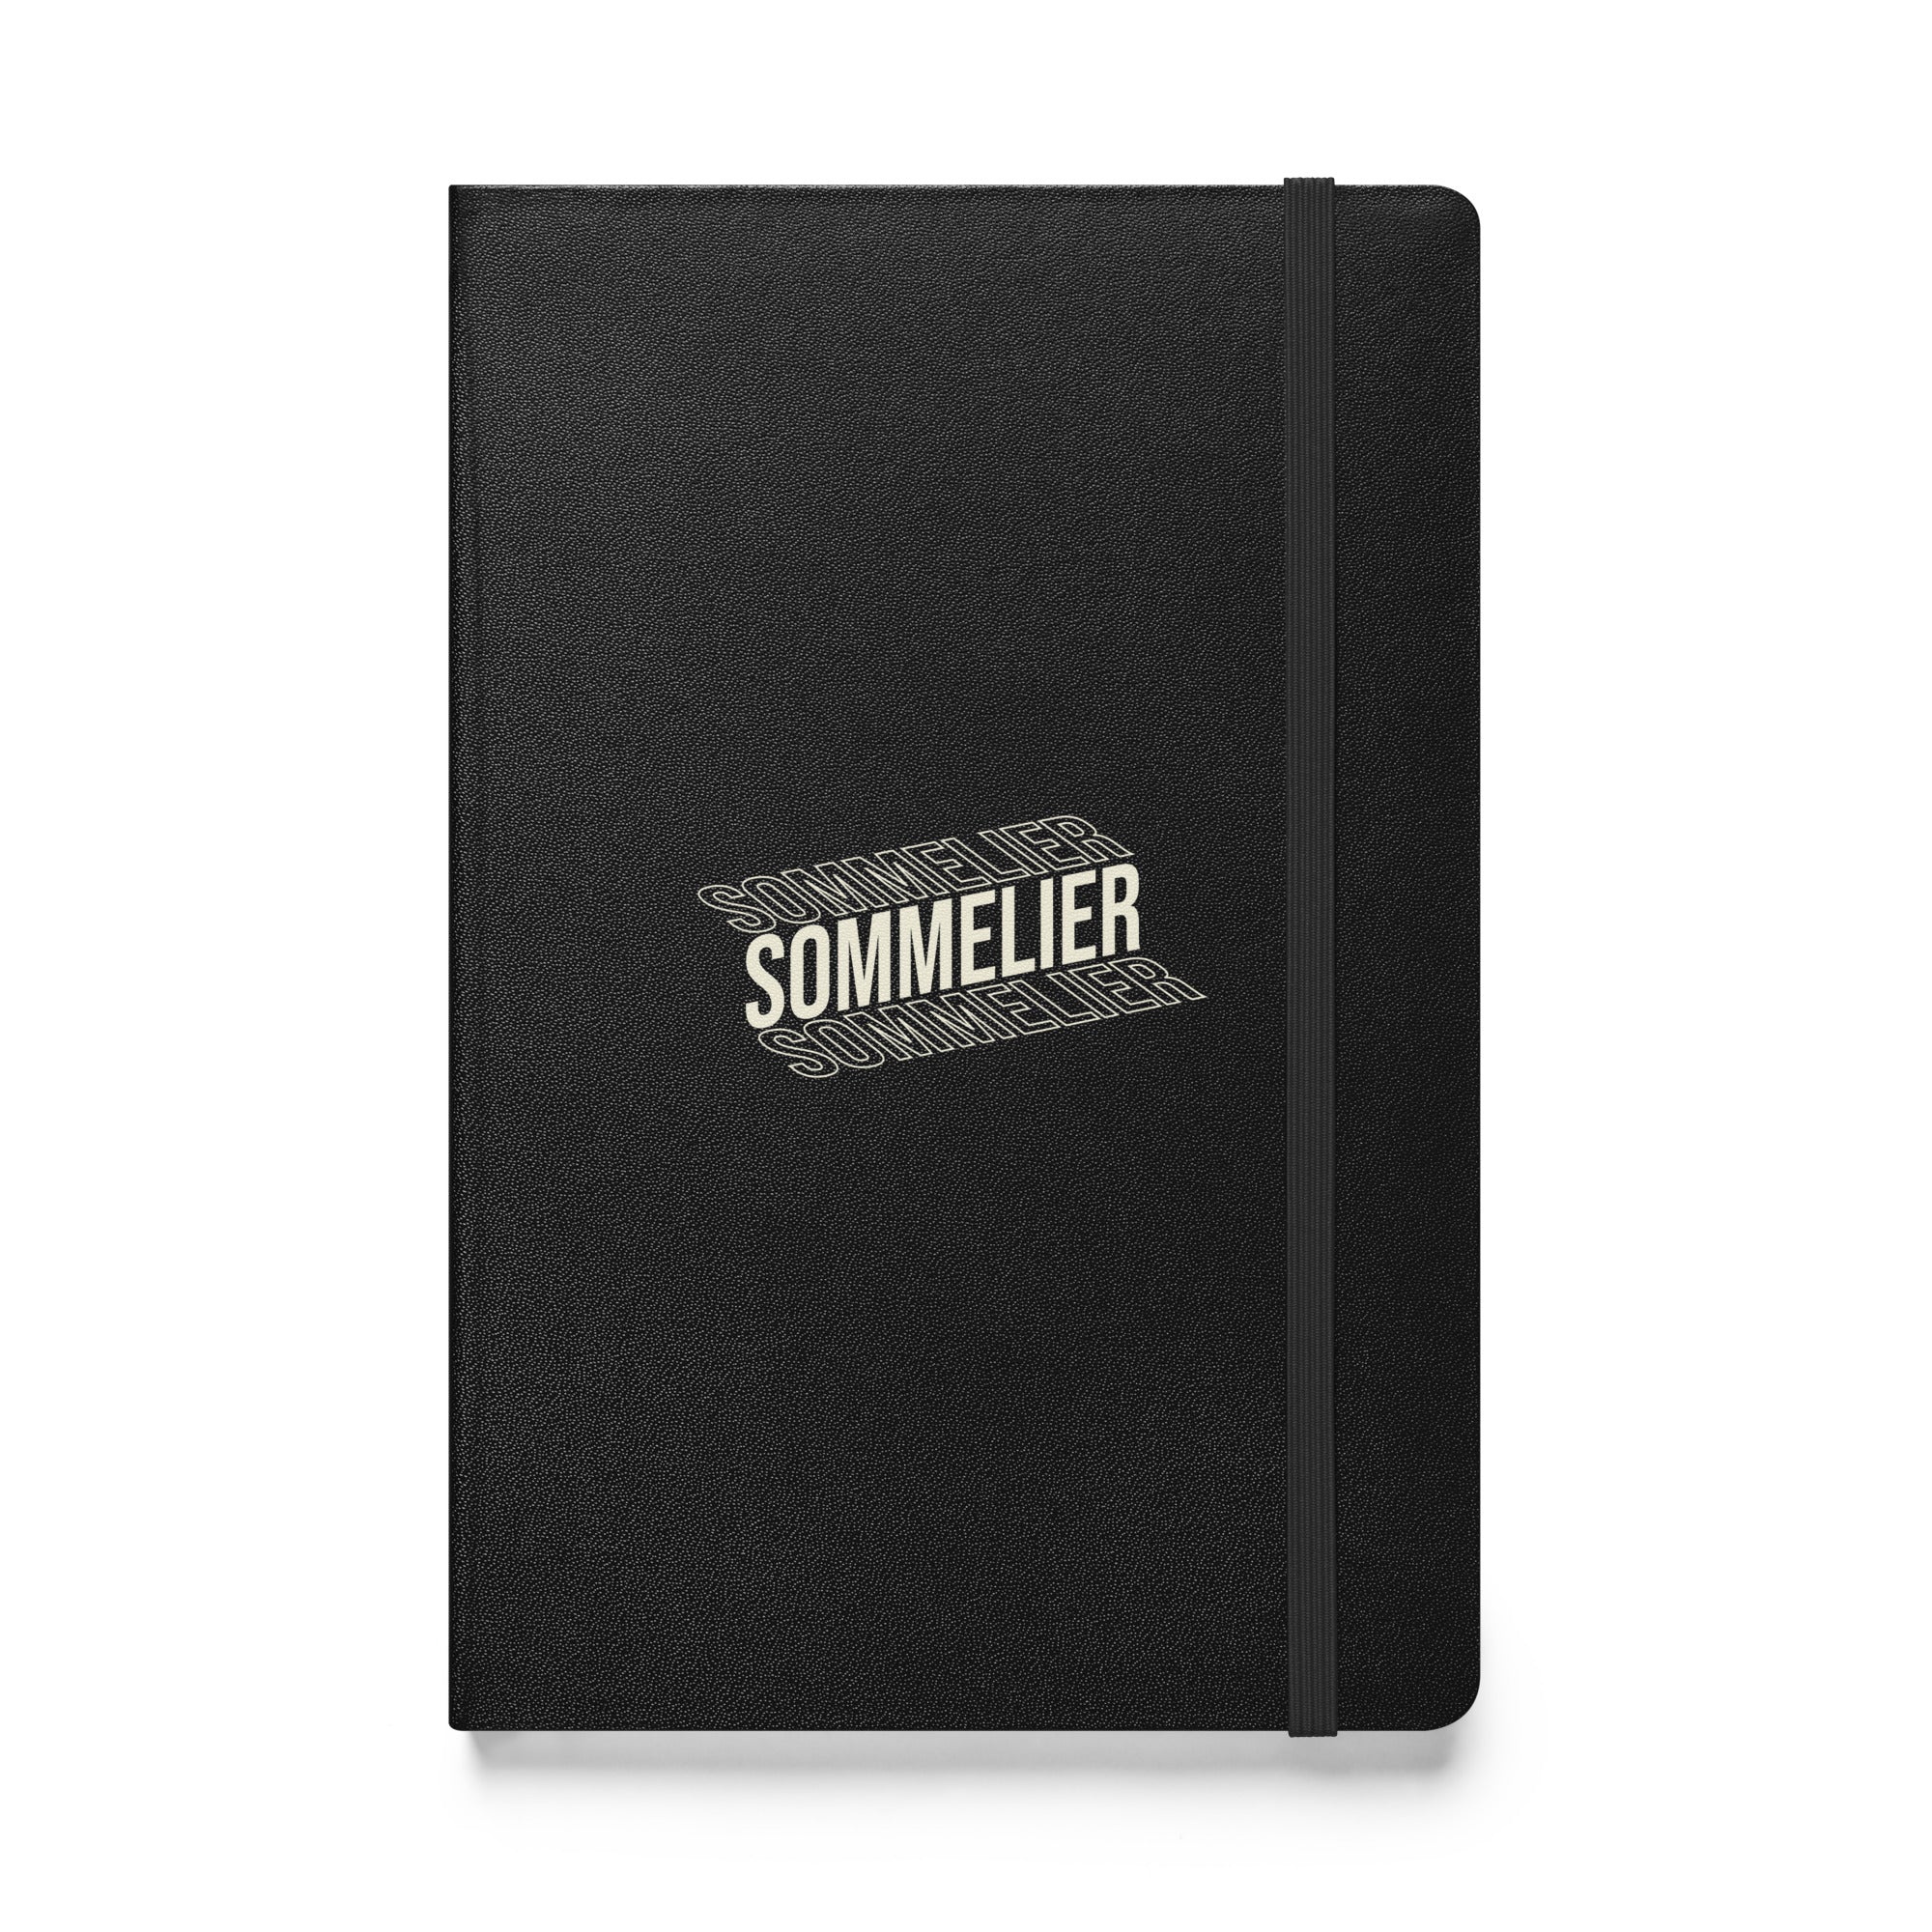 Sommelier Study Hardcover Bound Notebook